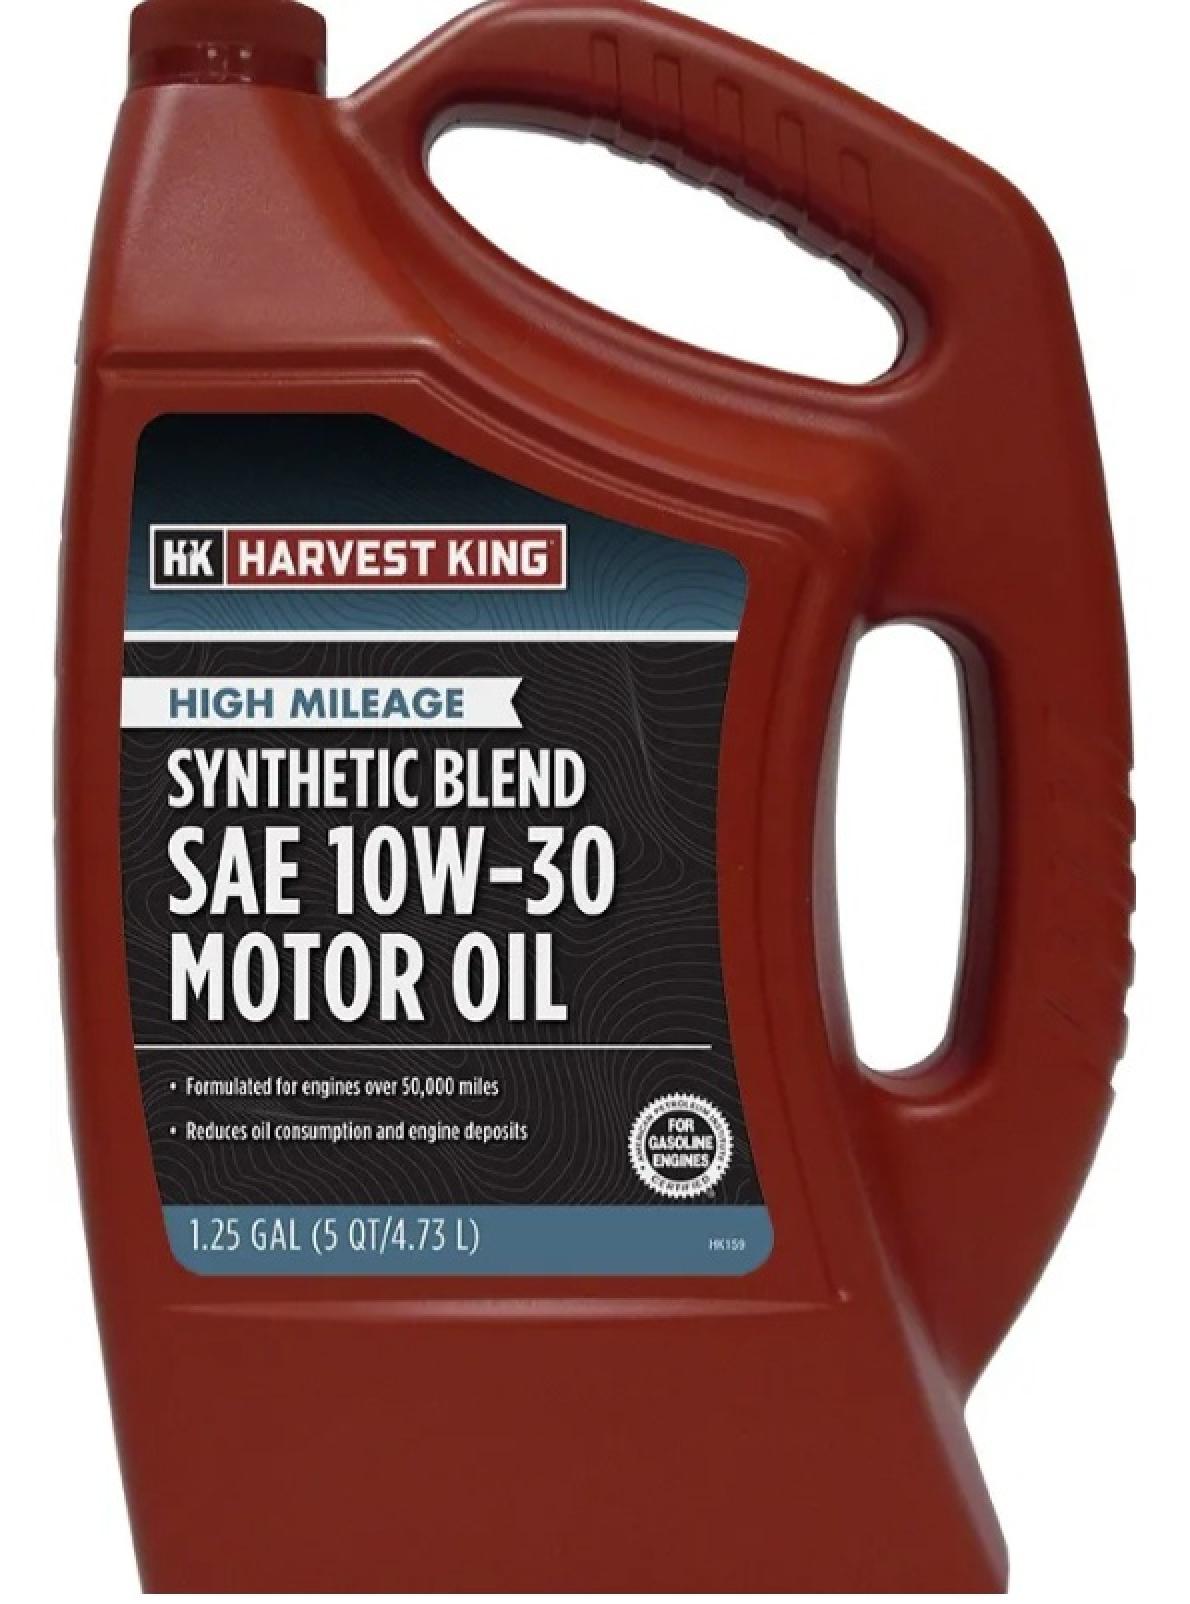 Harvest King High Mileage Synthetic Blend SAE 10W-30 Motor Oil